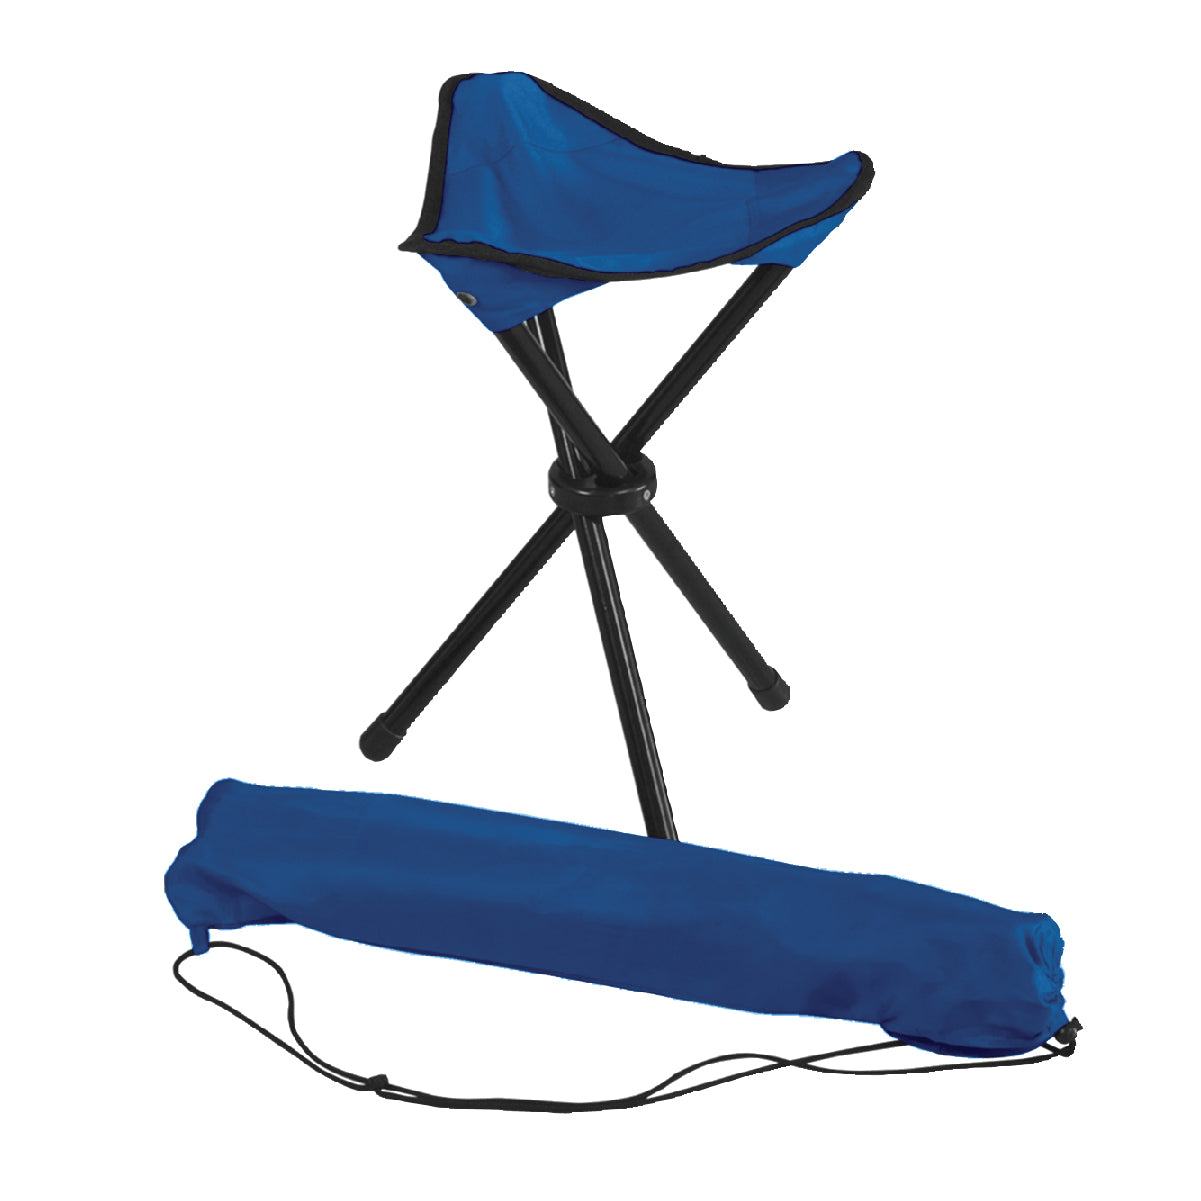 Folding Tripod Stool With Carrying Bag